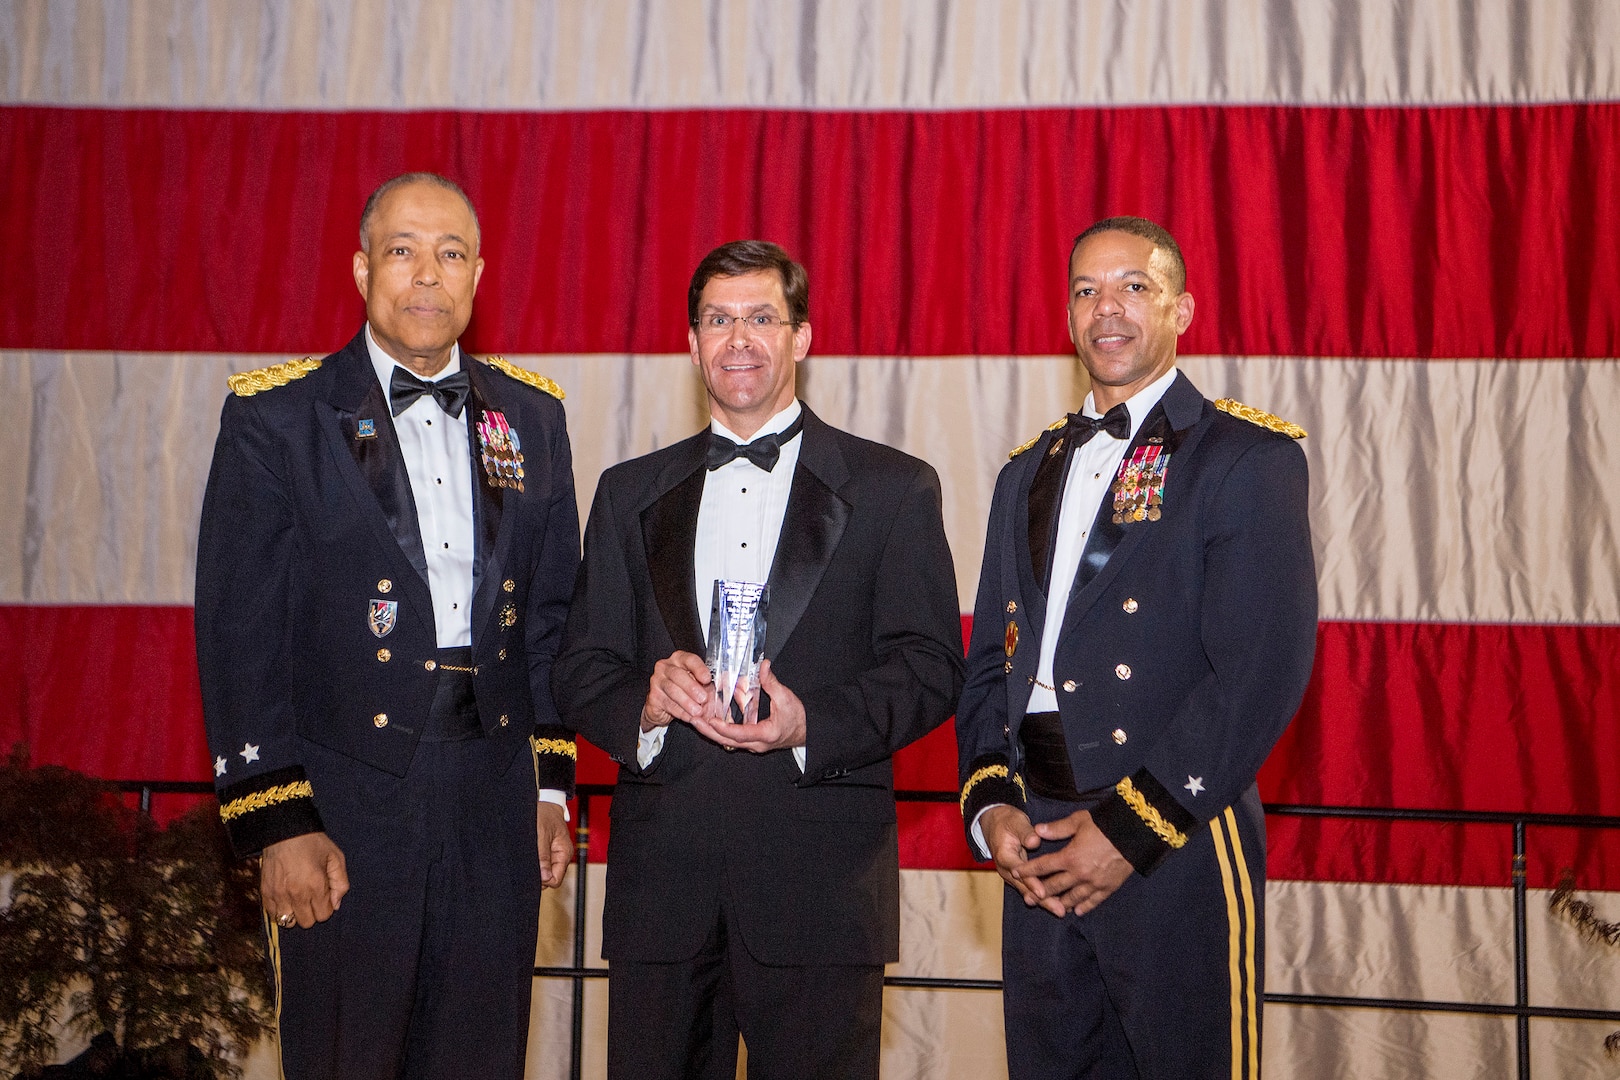 Dr. Mark T. Esper, 23rd Secretary of the U.S. Army, assisted by Airman 1st Class Alejandro Irizarry-Cortes and Pfc. Monique Jones, cut the District of Columbia National Guard’s birthday cake, during the DCNG Military Ball at the DCNG Armory, May 5, 2018. The ball was held in the first week of May to commemorate the establishment of the DCNG on May 3, 1802. (U.S. Army photo by Daniel Torok)